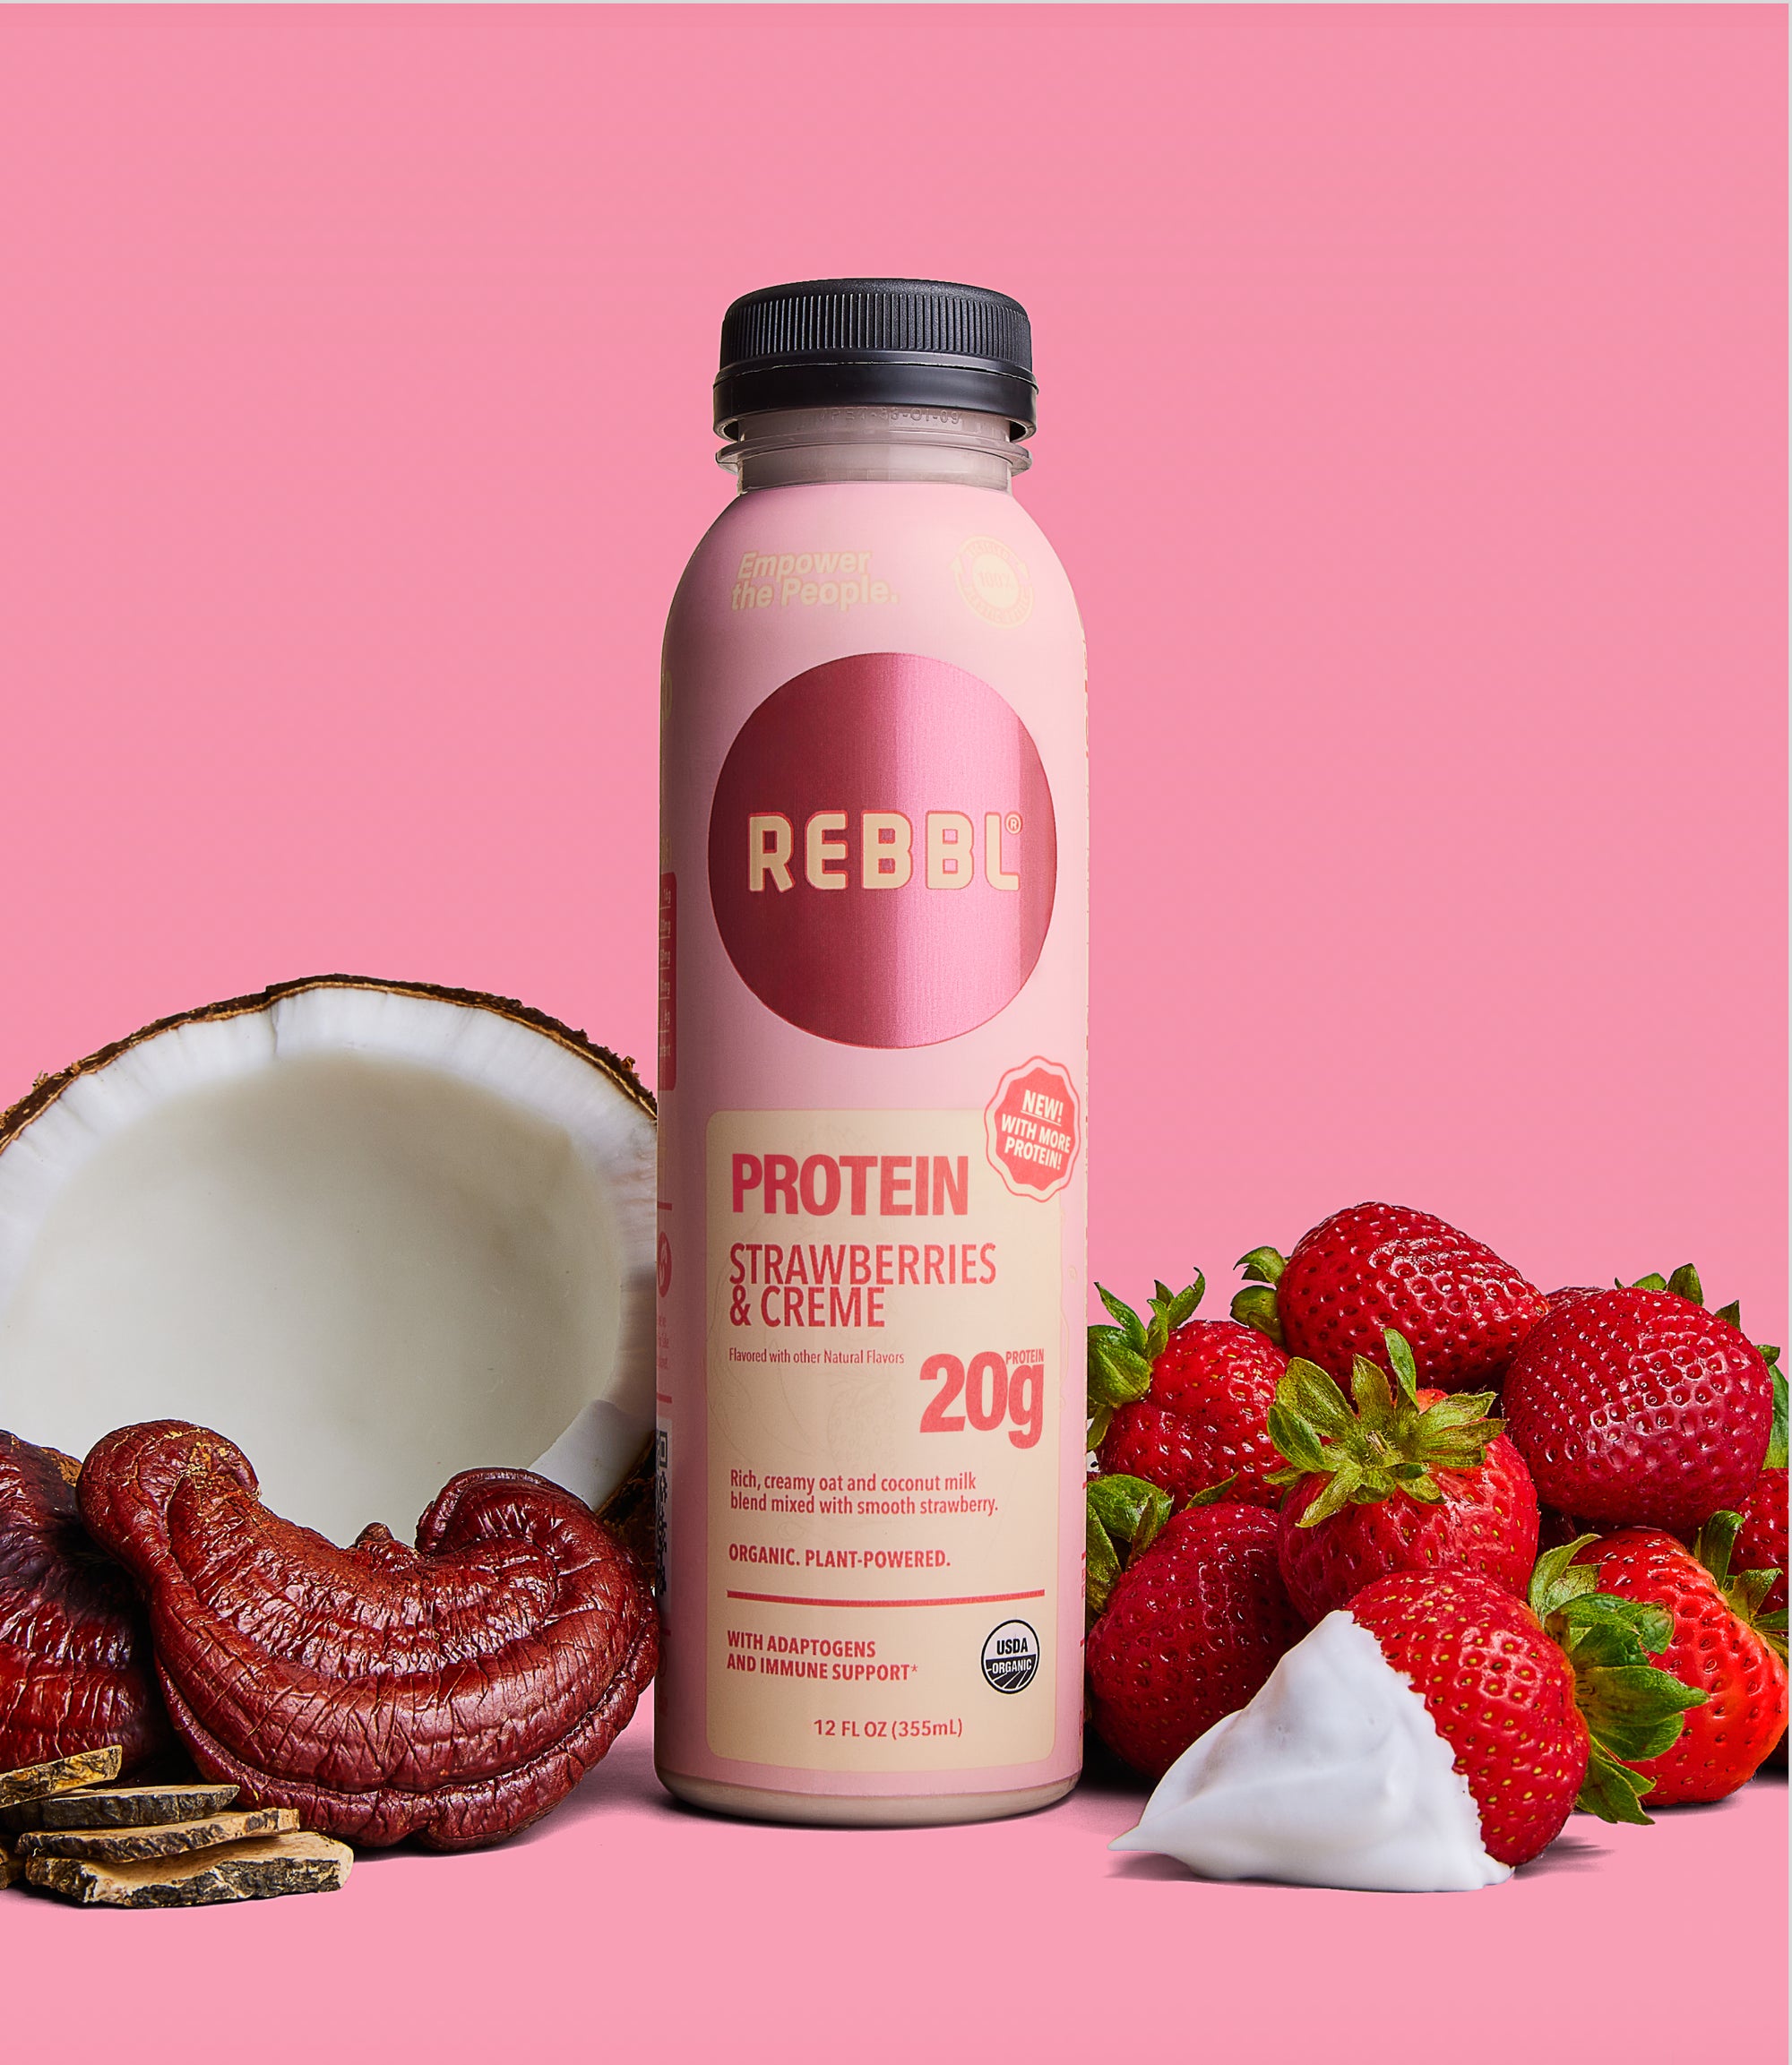 Protein Strawberries and Creme